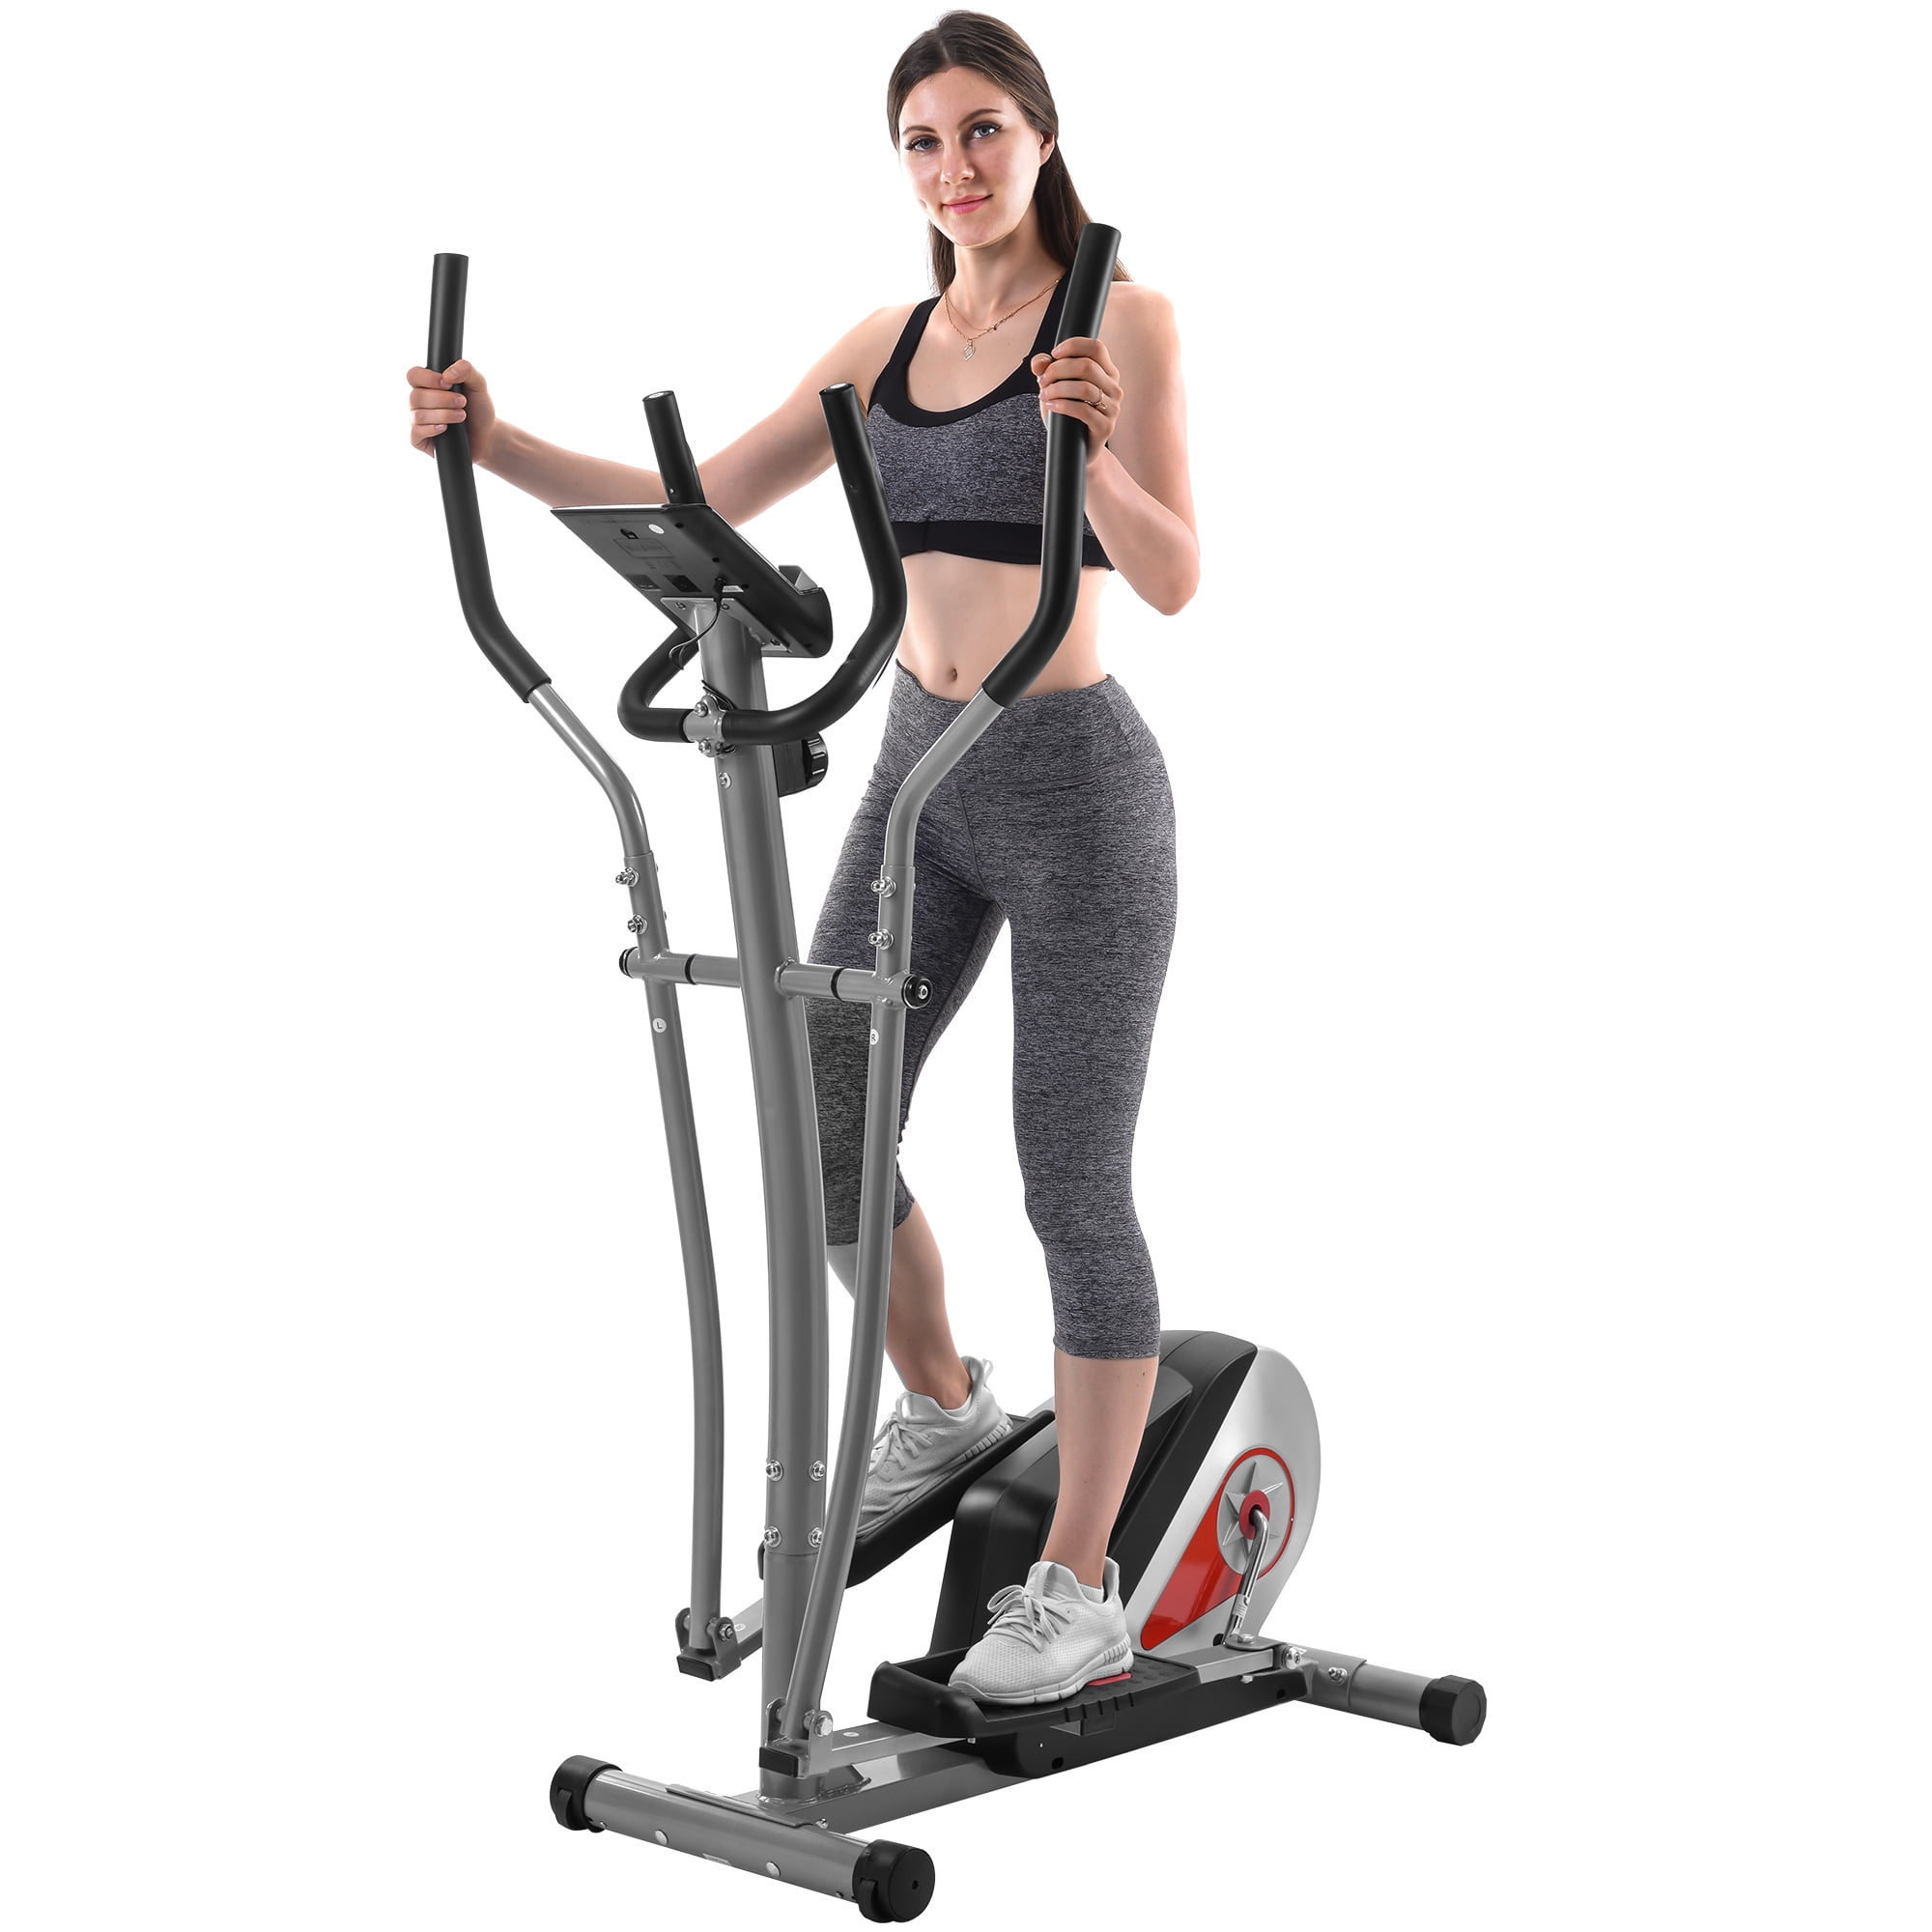 Upgraded Elliptical Machine Eliptical Exercise Machine for Home Use Trainer+LCD. 